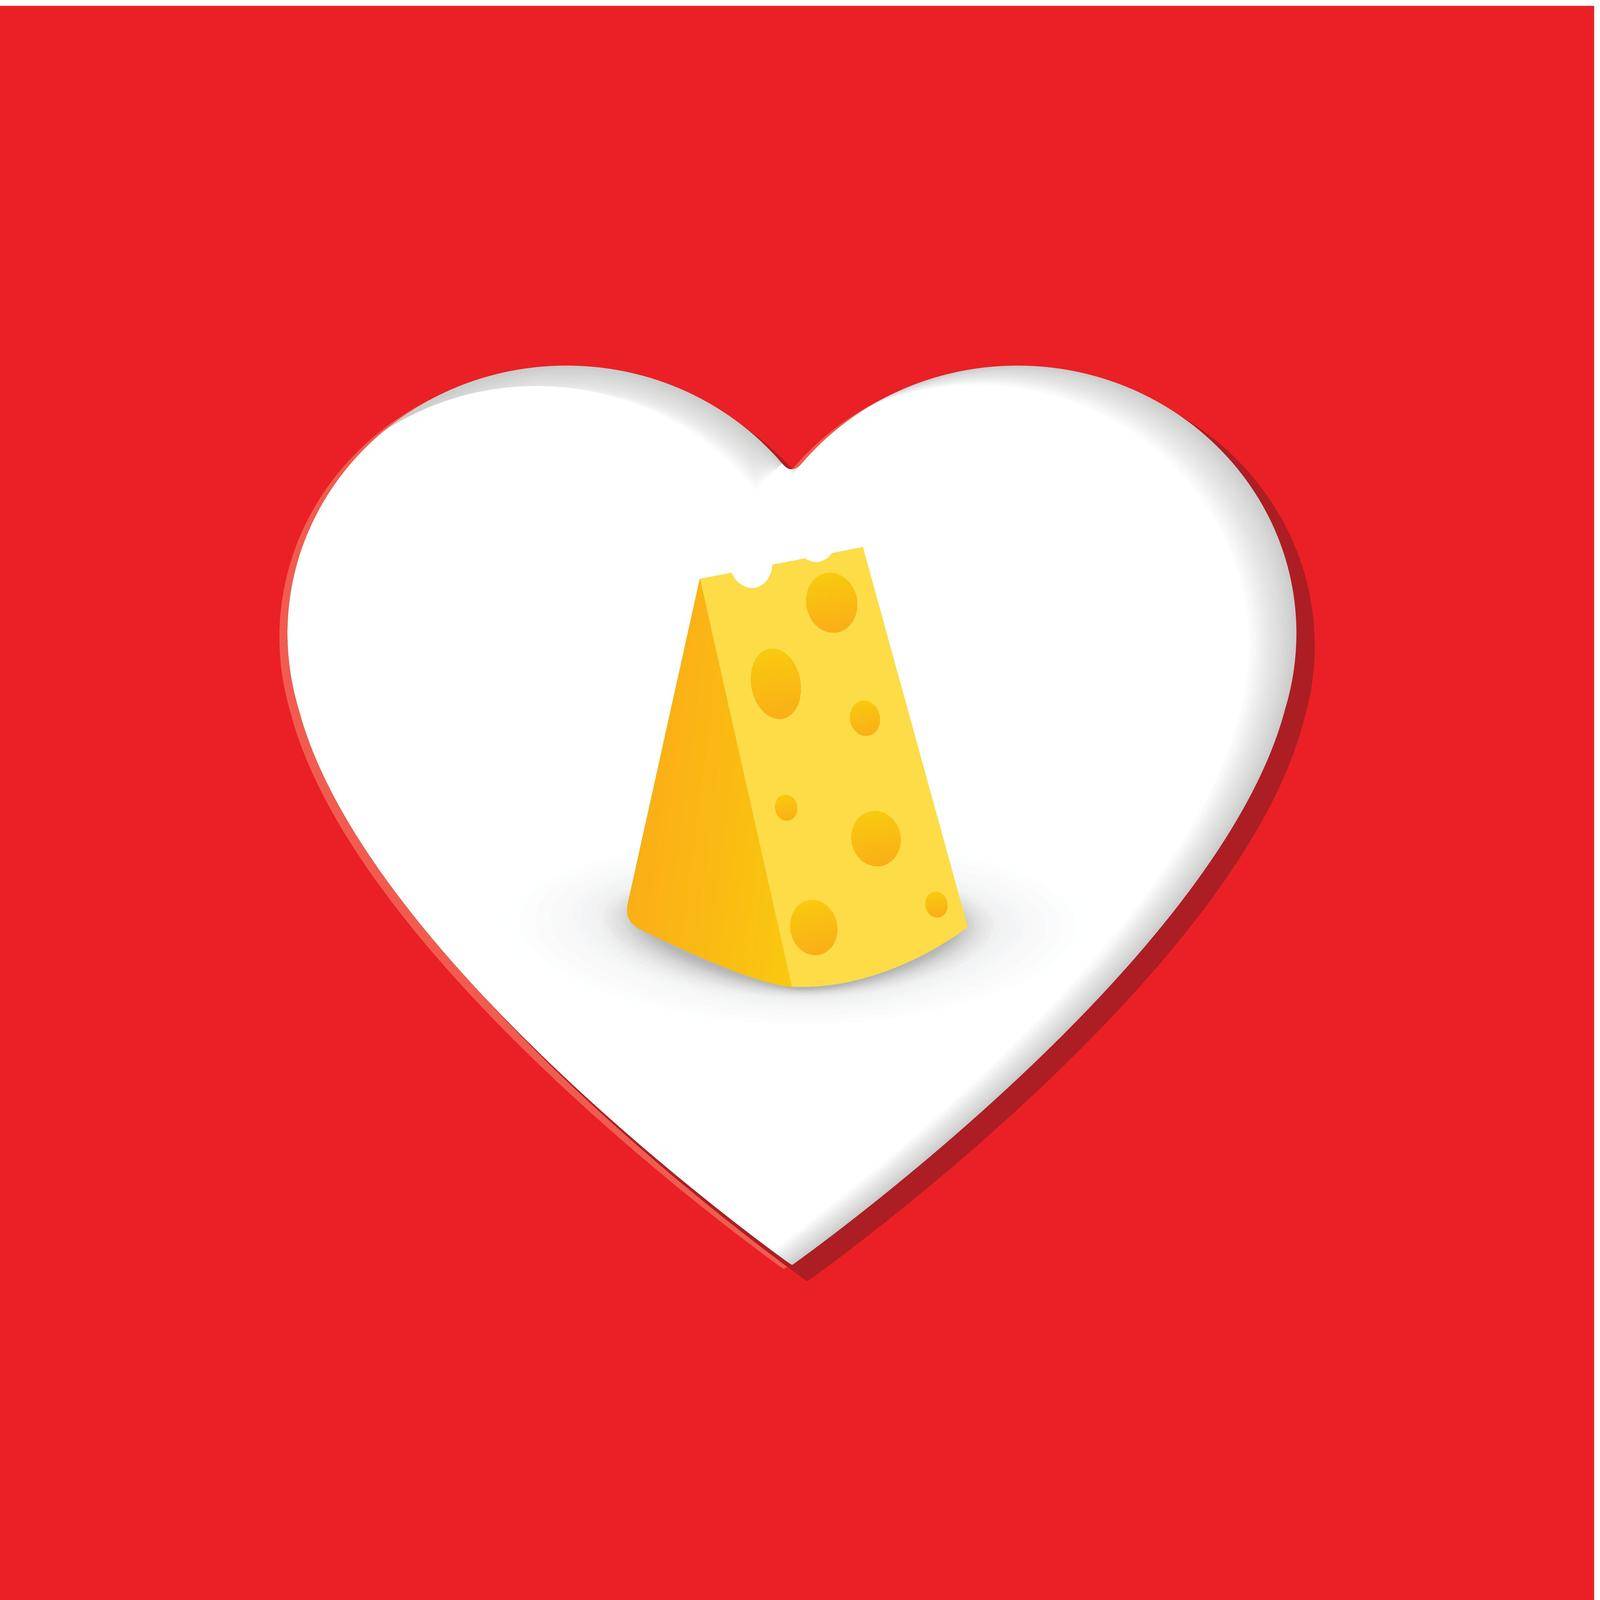 Cheese in shape of heart on red background. Vector Illustration.